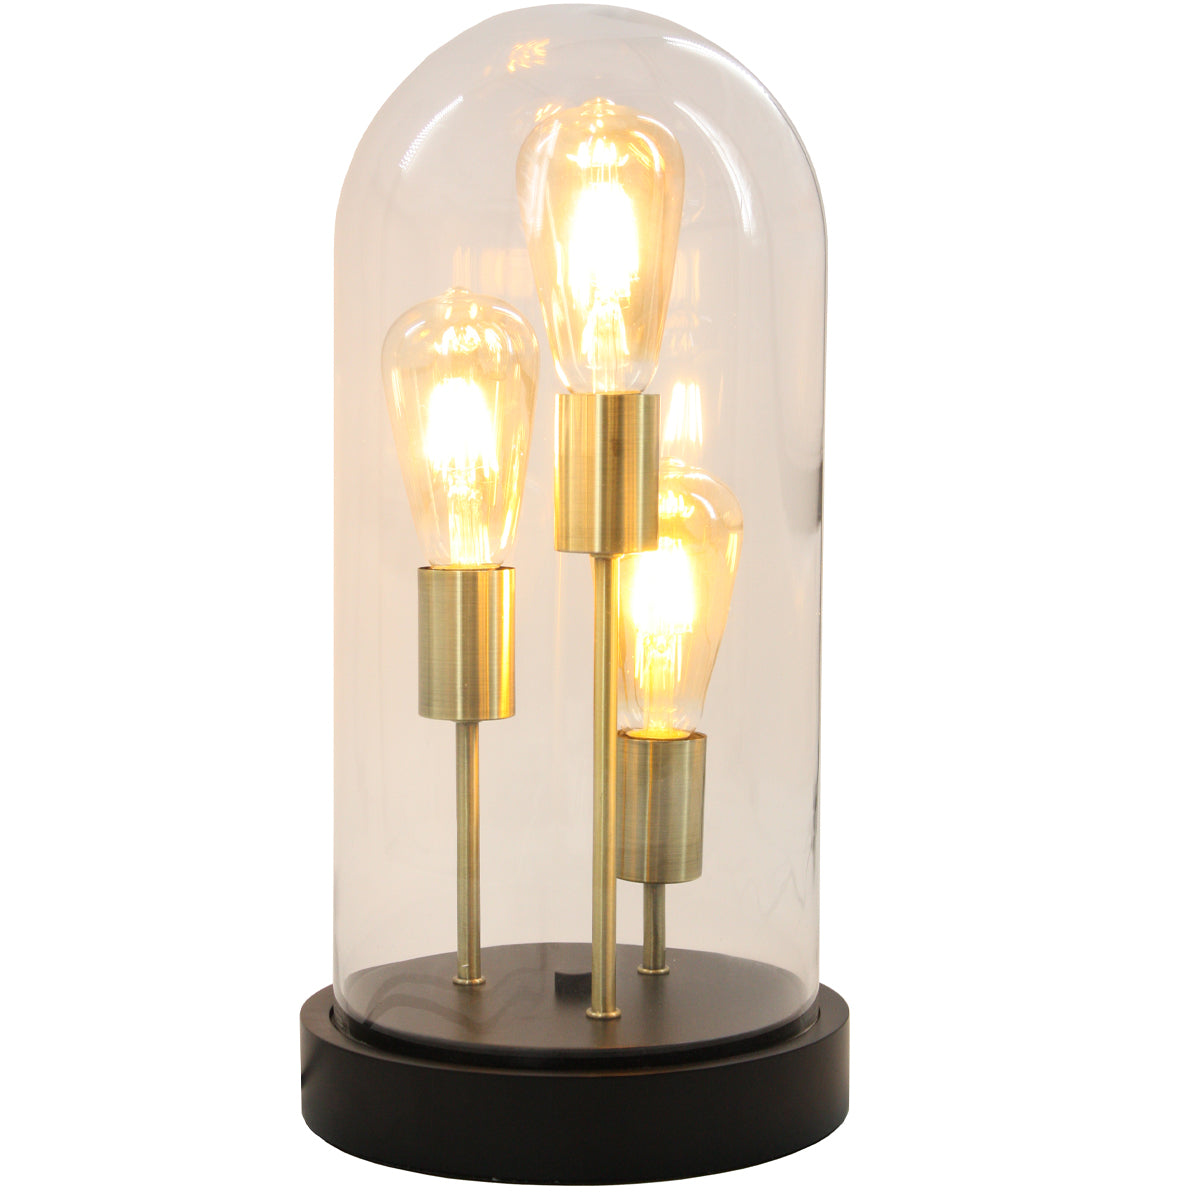 CGC BELLE 3 Light Dome Table Lamp